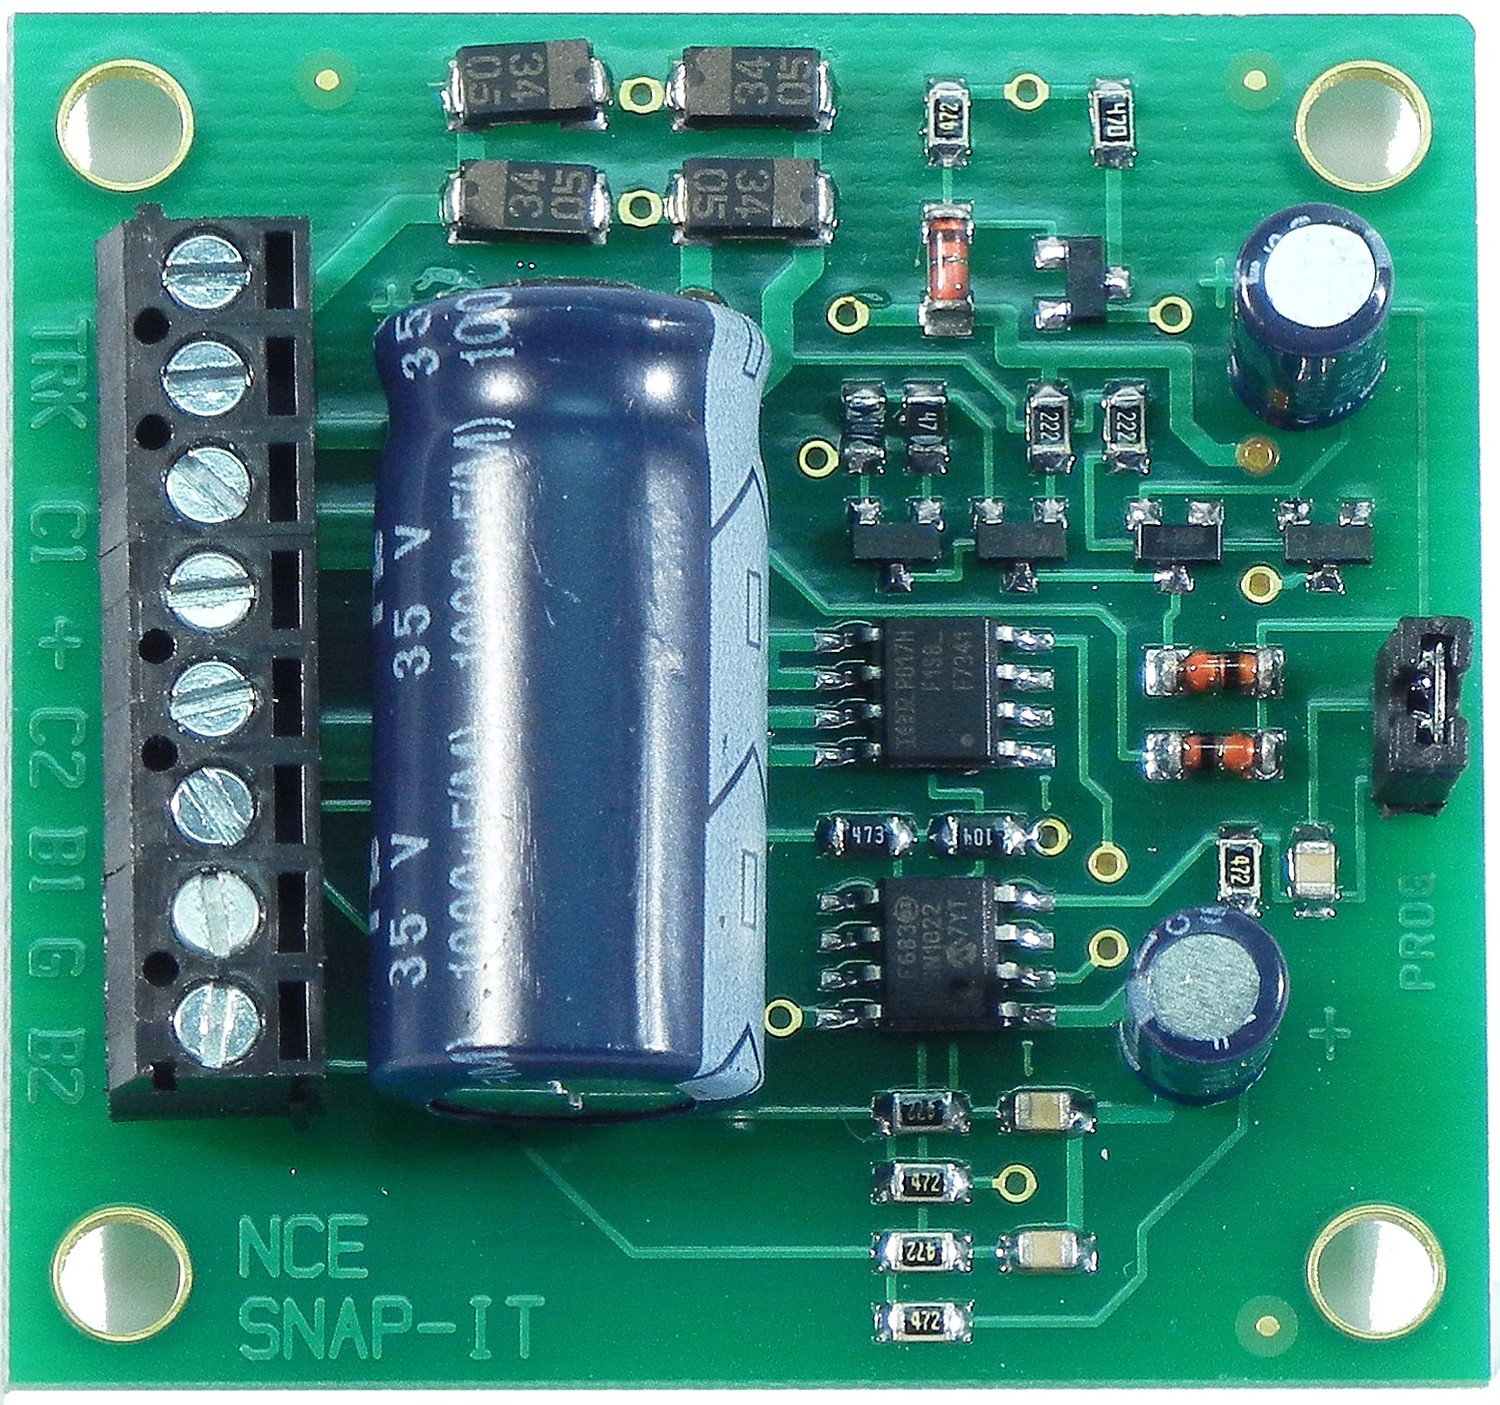 NCE Snap-It twin coil accessory decoder